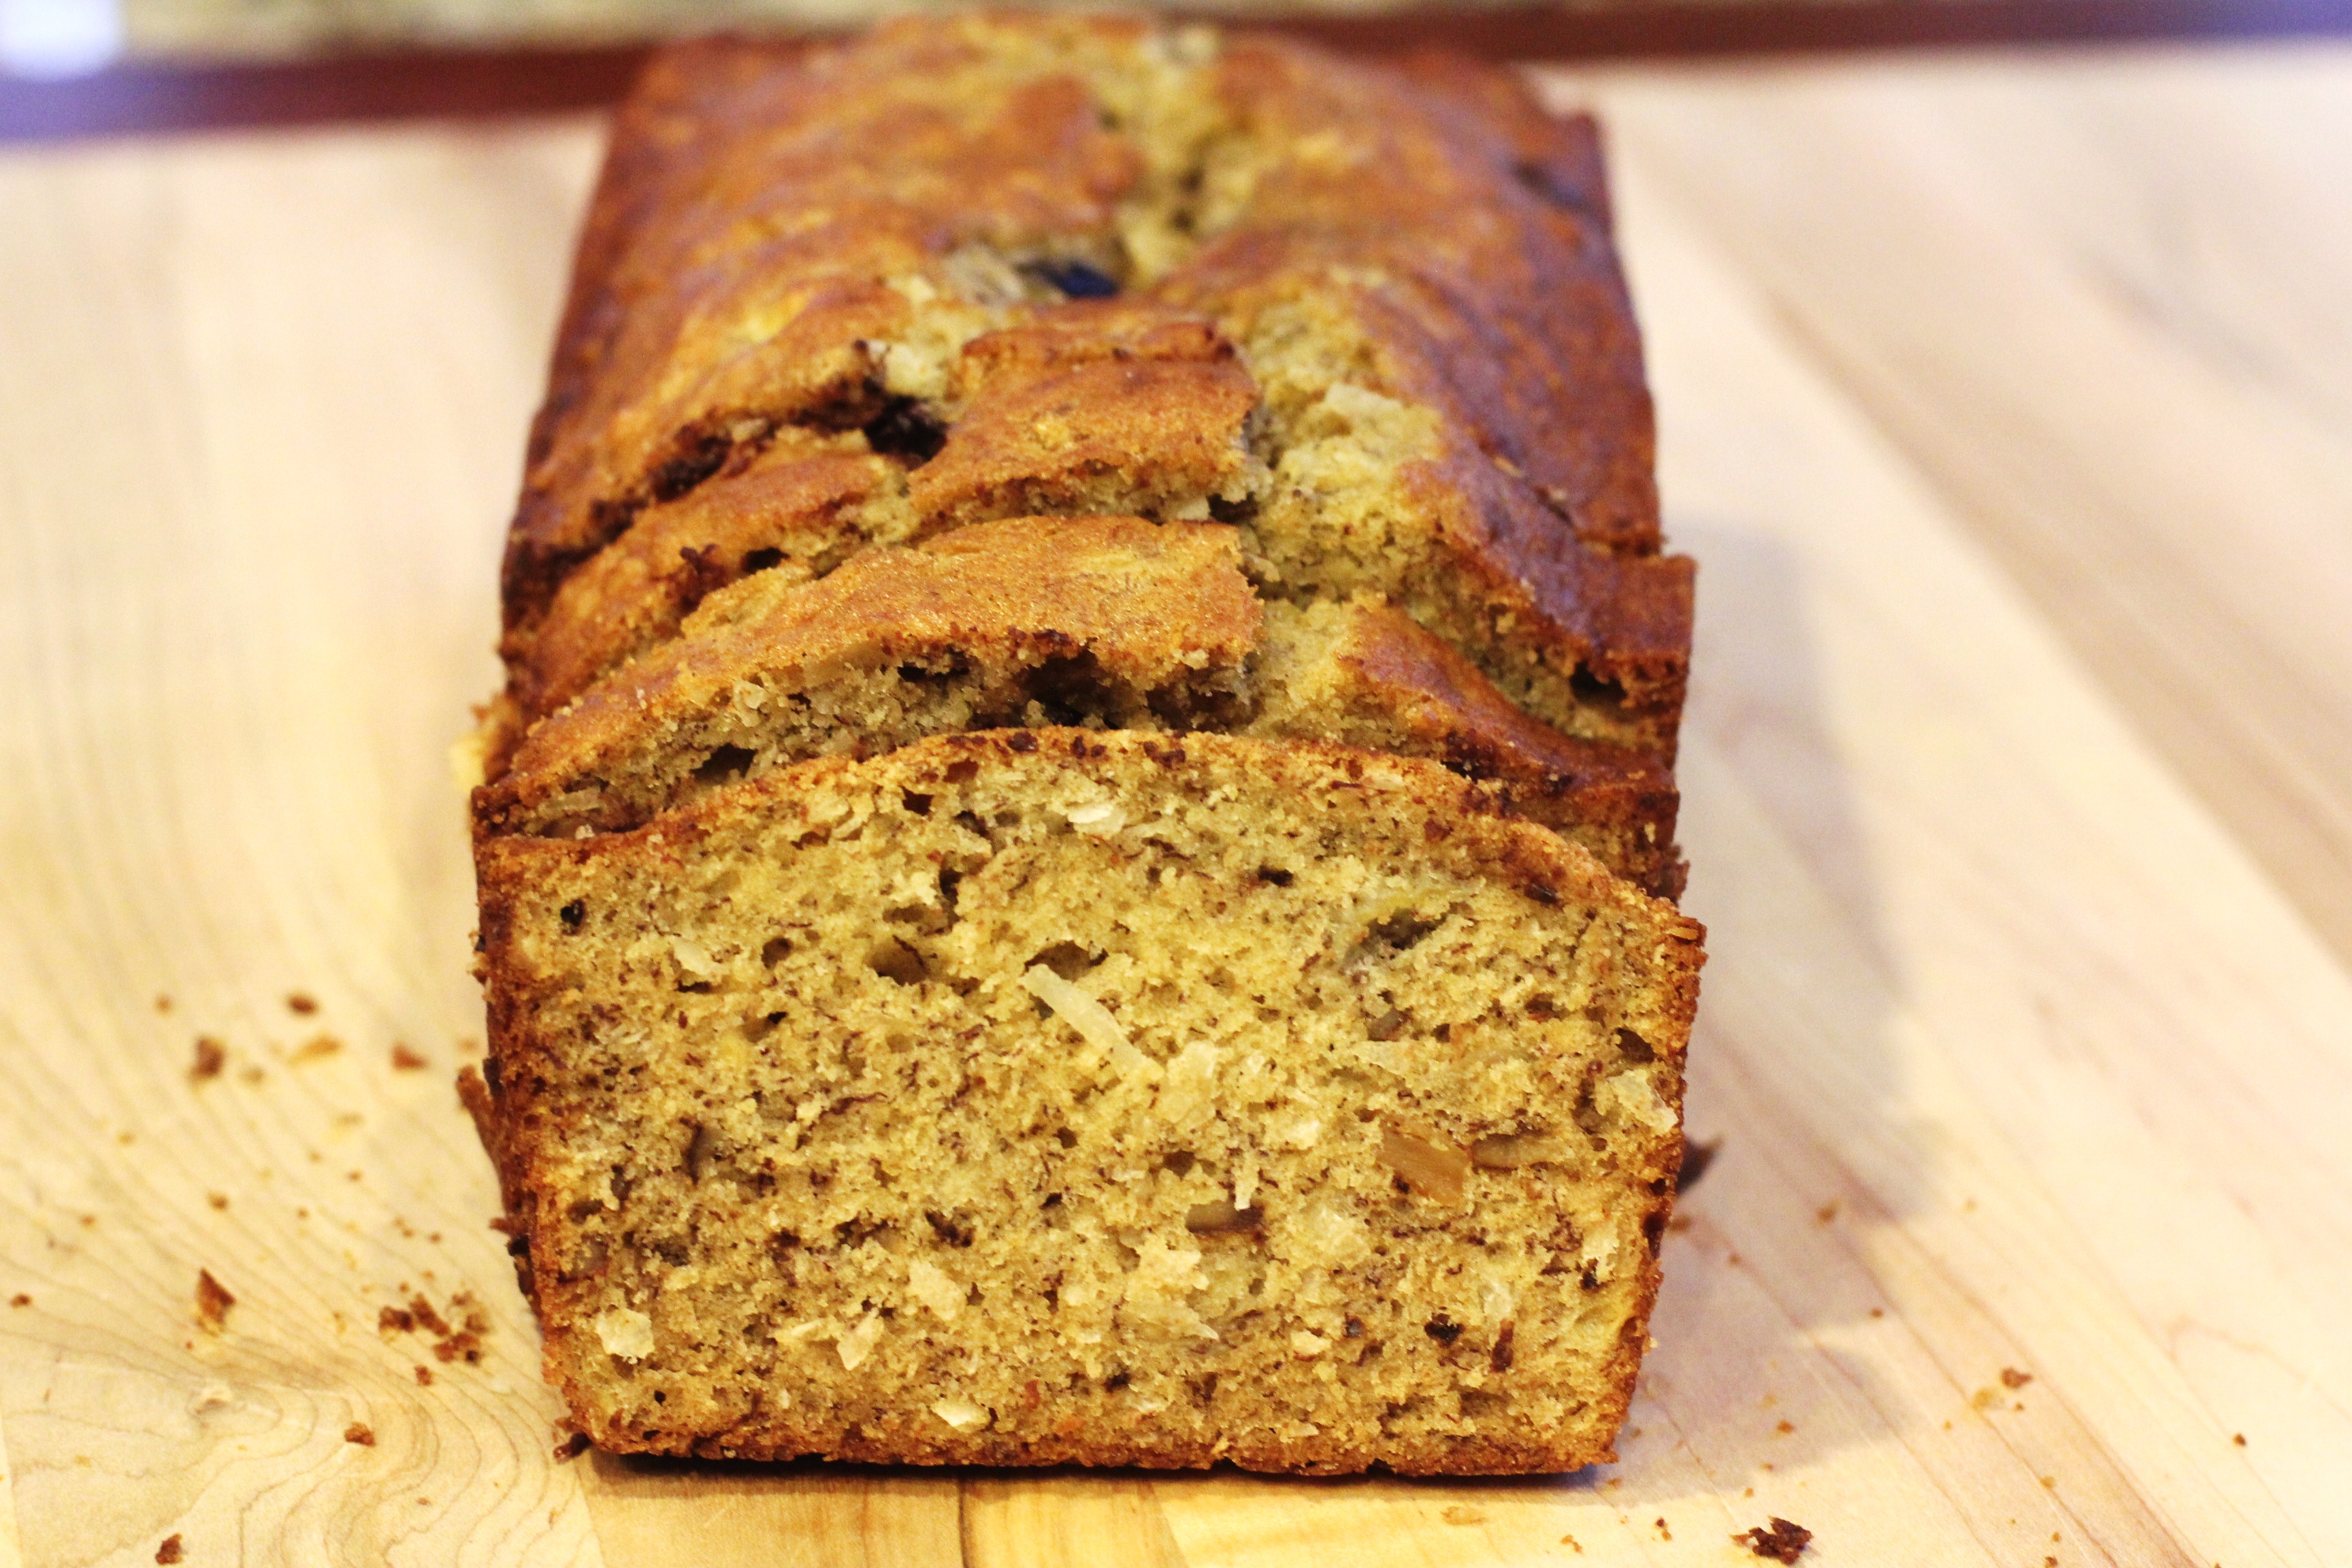 Recipe: Banana Bread with Walnuts, Coconut and Chocolate Chips